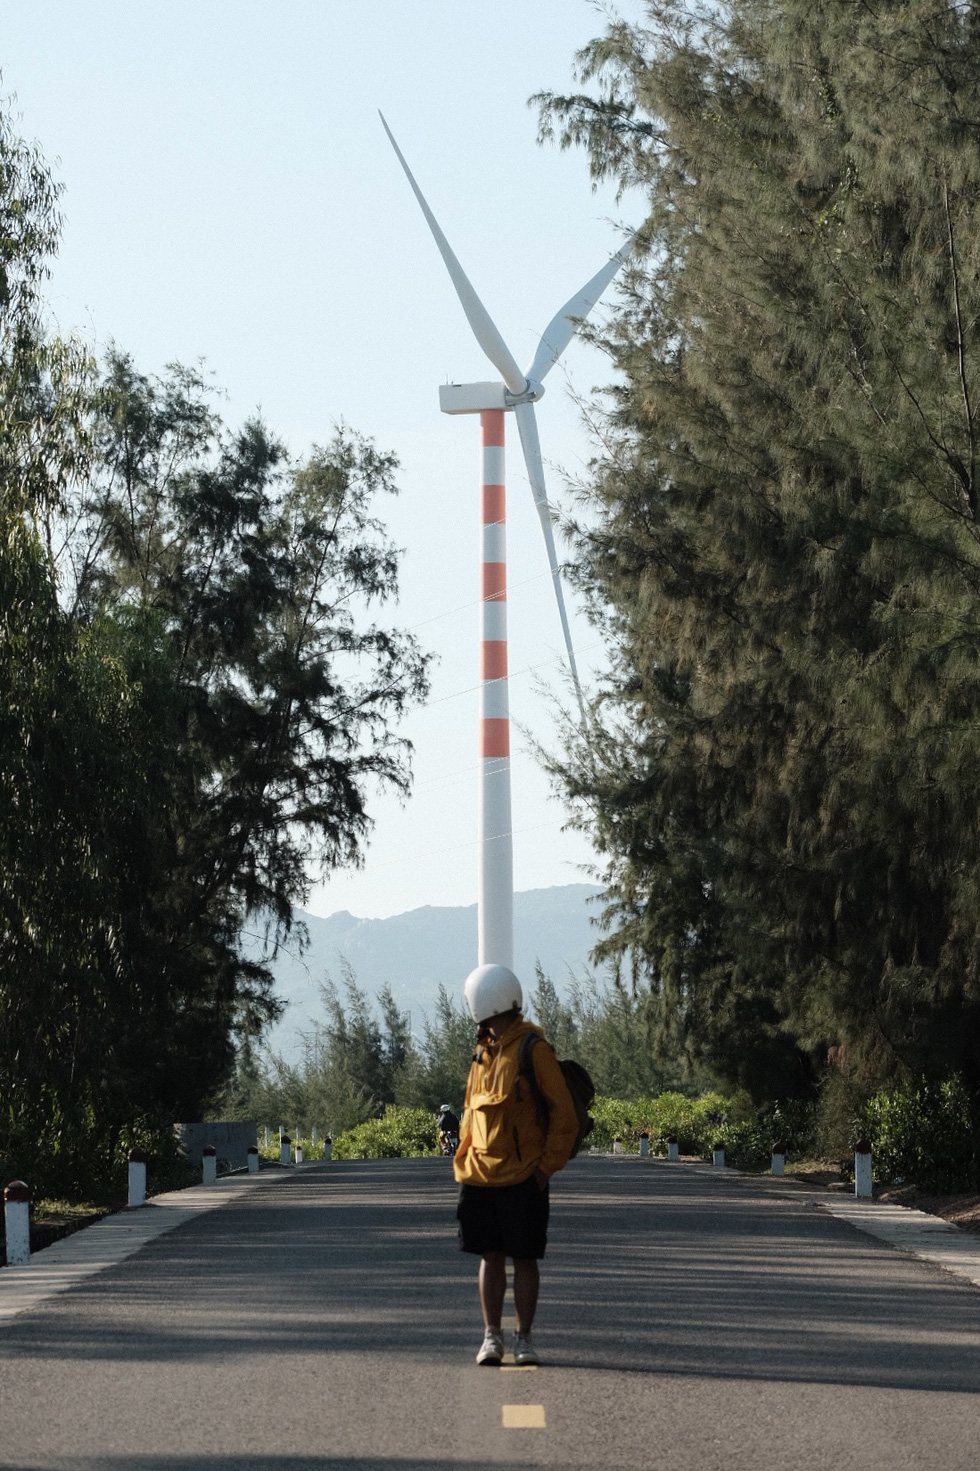 A tourist poses for a photo against a background of wind turbines in Quy Nhon City, Binh Dinh Province, south-central Vietnam. Photo: Lo Huu Duc Anh / Tuoi Tre